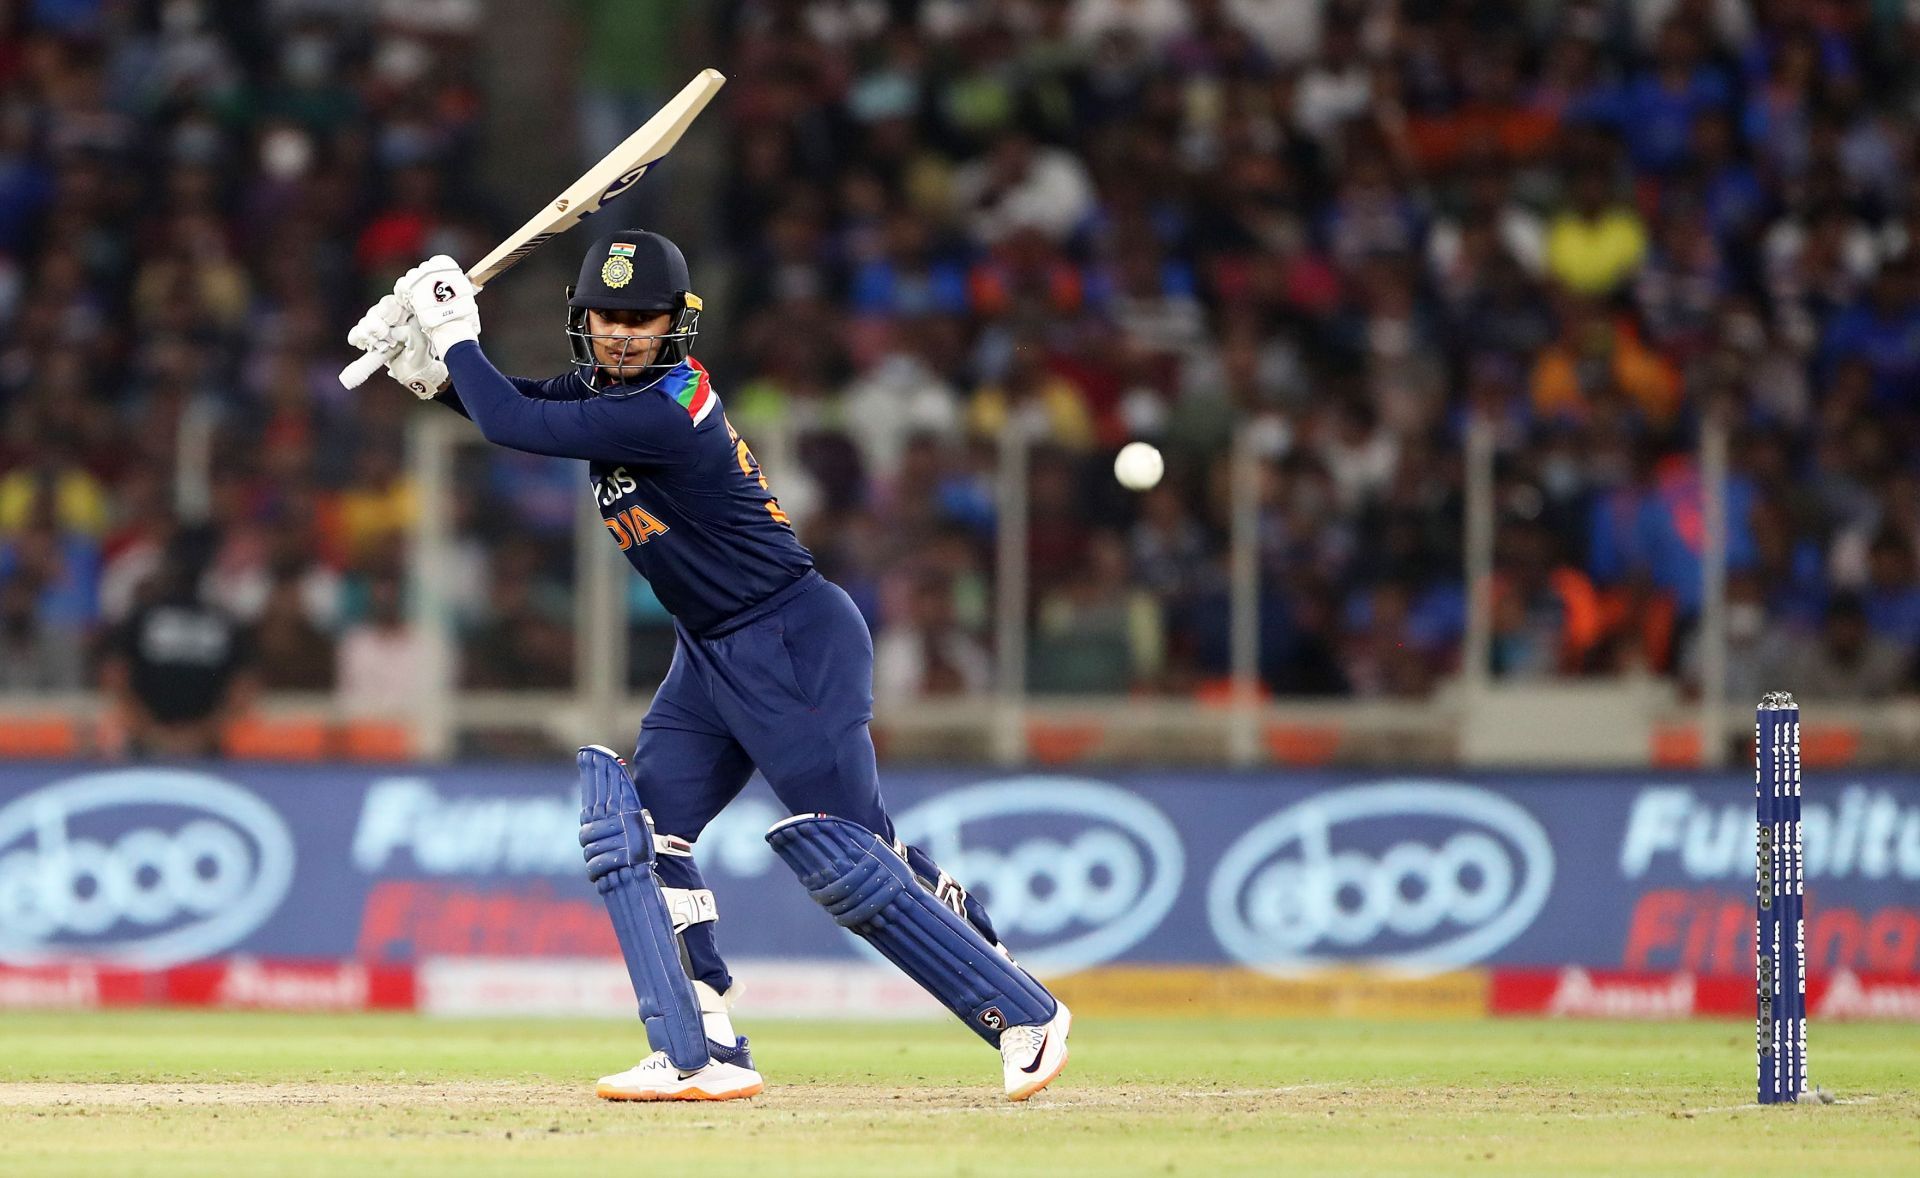 Ishan Kishan is known to play the aggressive game at the top of the order